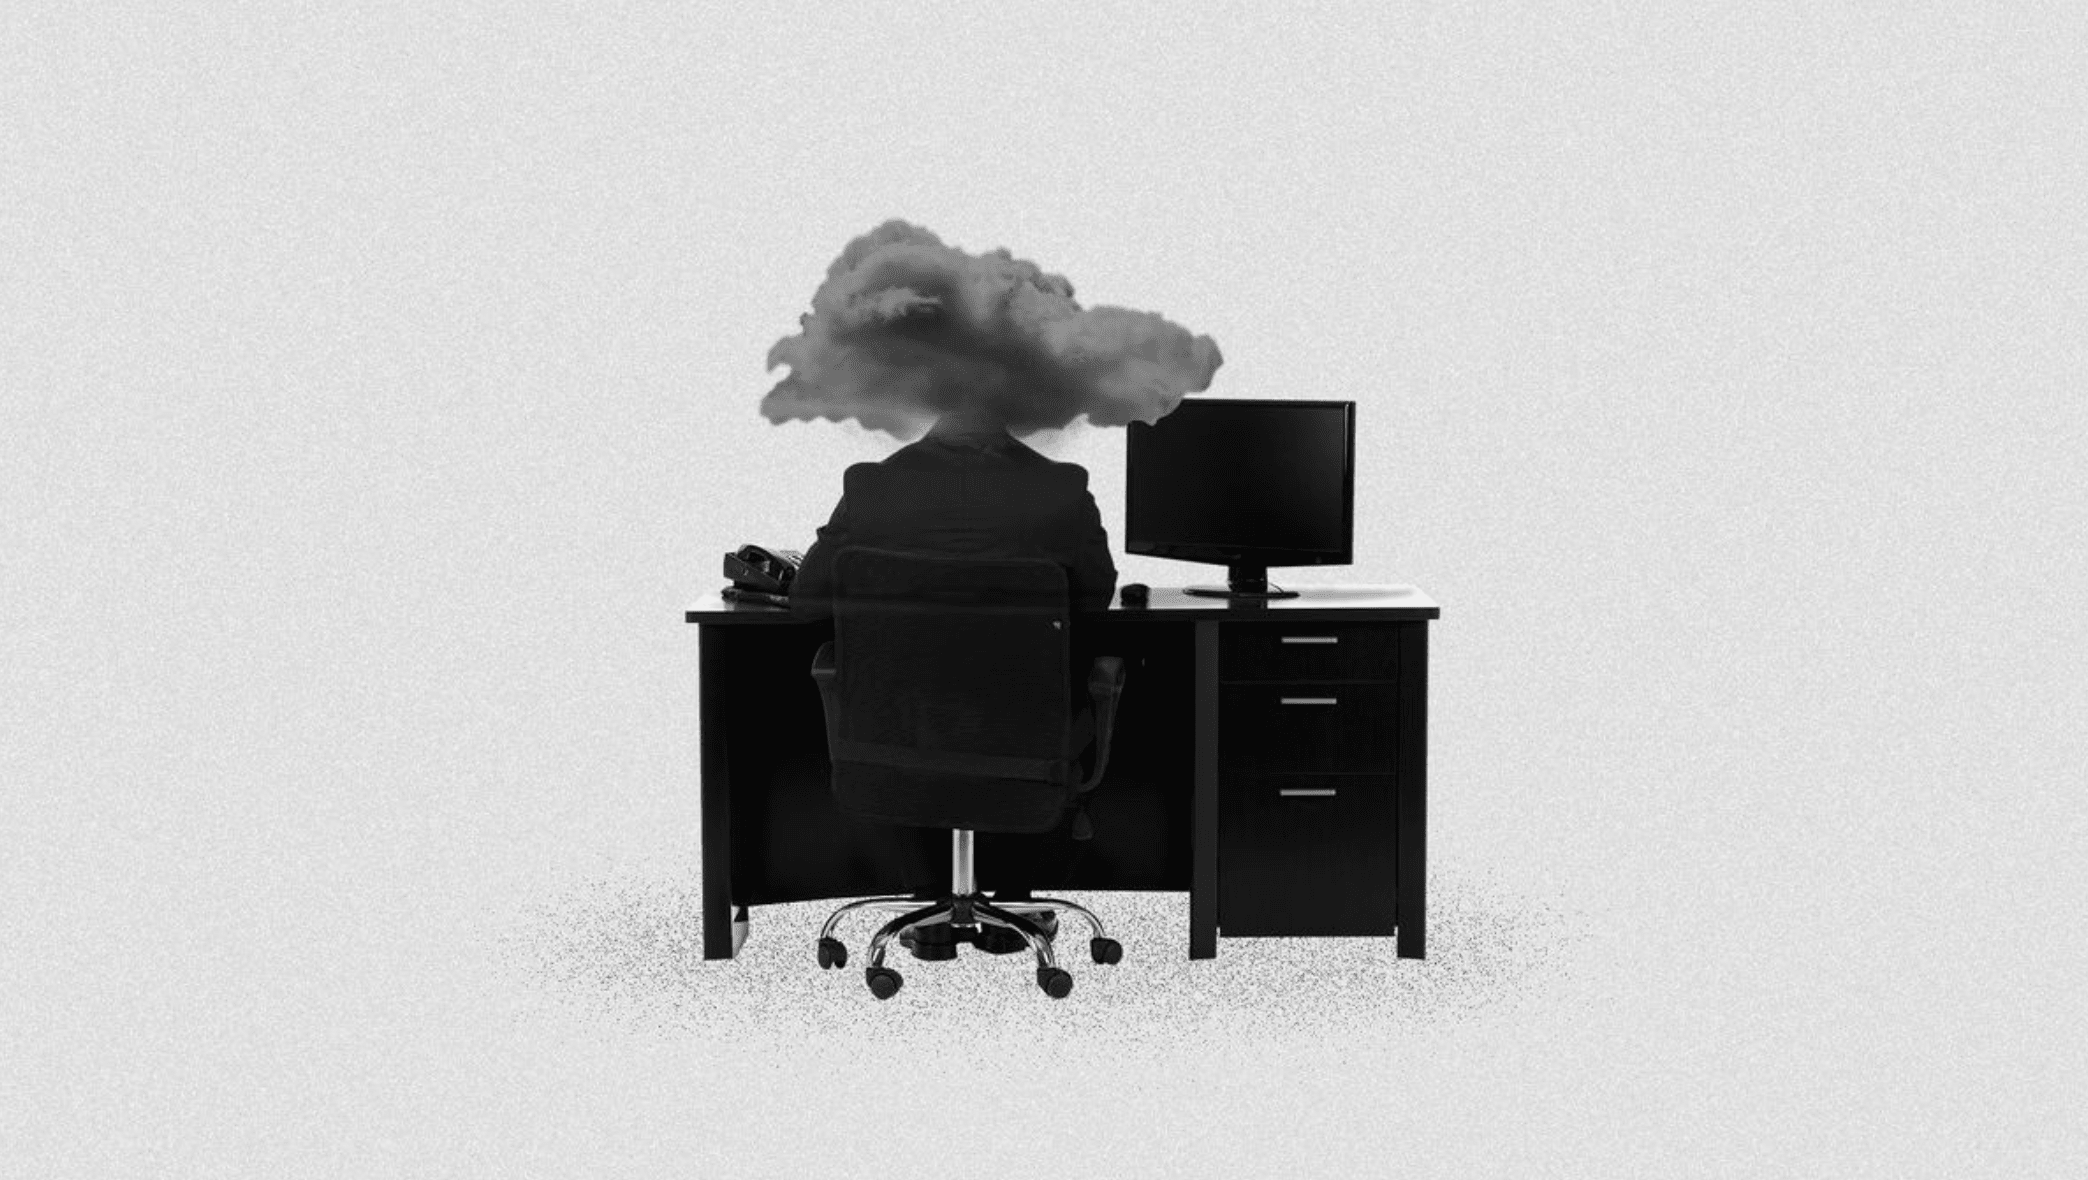 A person sitting at a desk with a cloud over their head